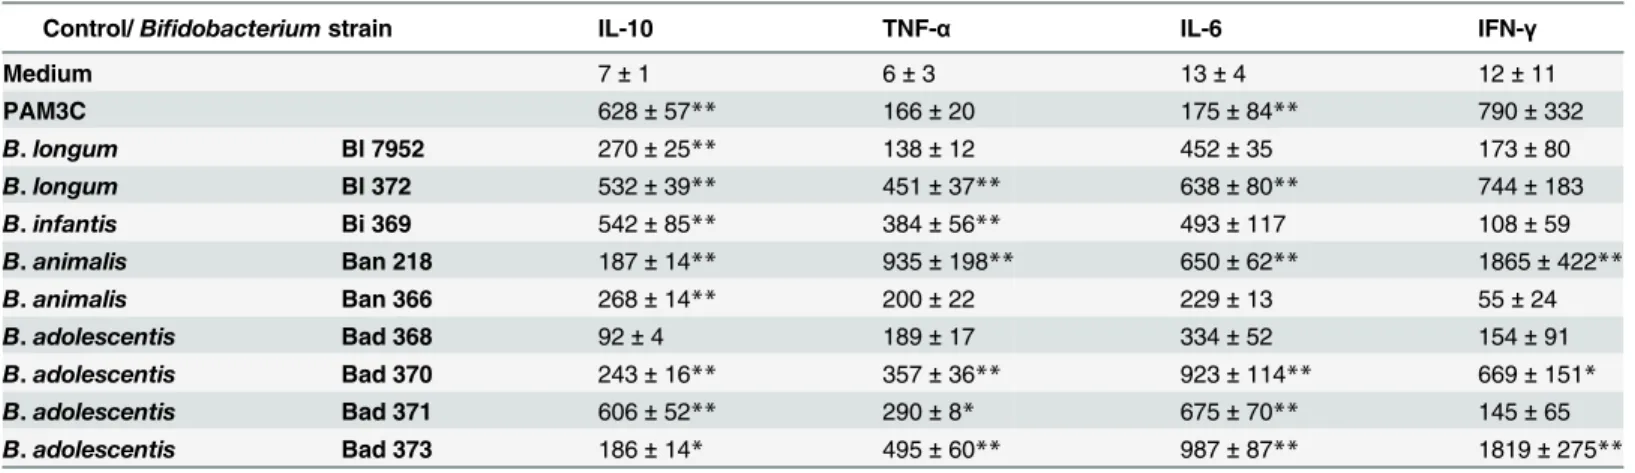 Table 1. Cytokine production by splenocytes stimulated with inactivated bacteria of different Bifidobacterium strains.